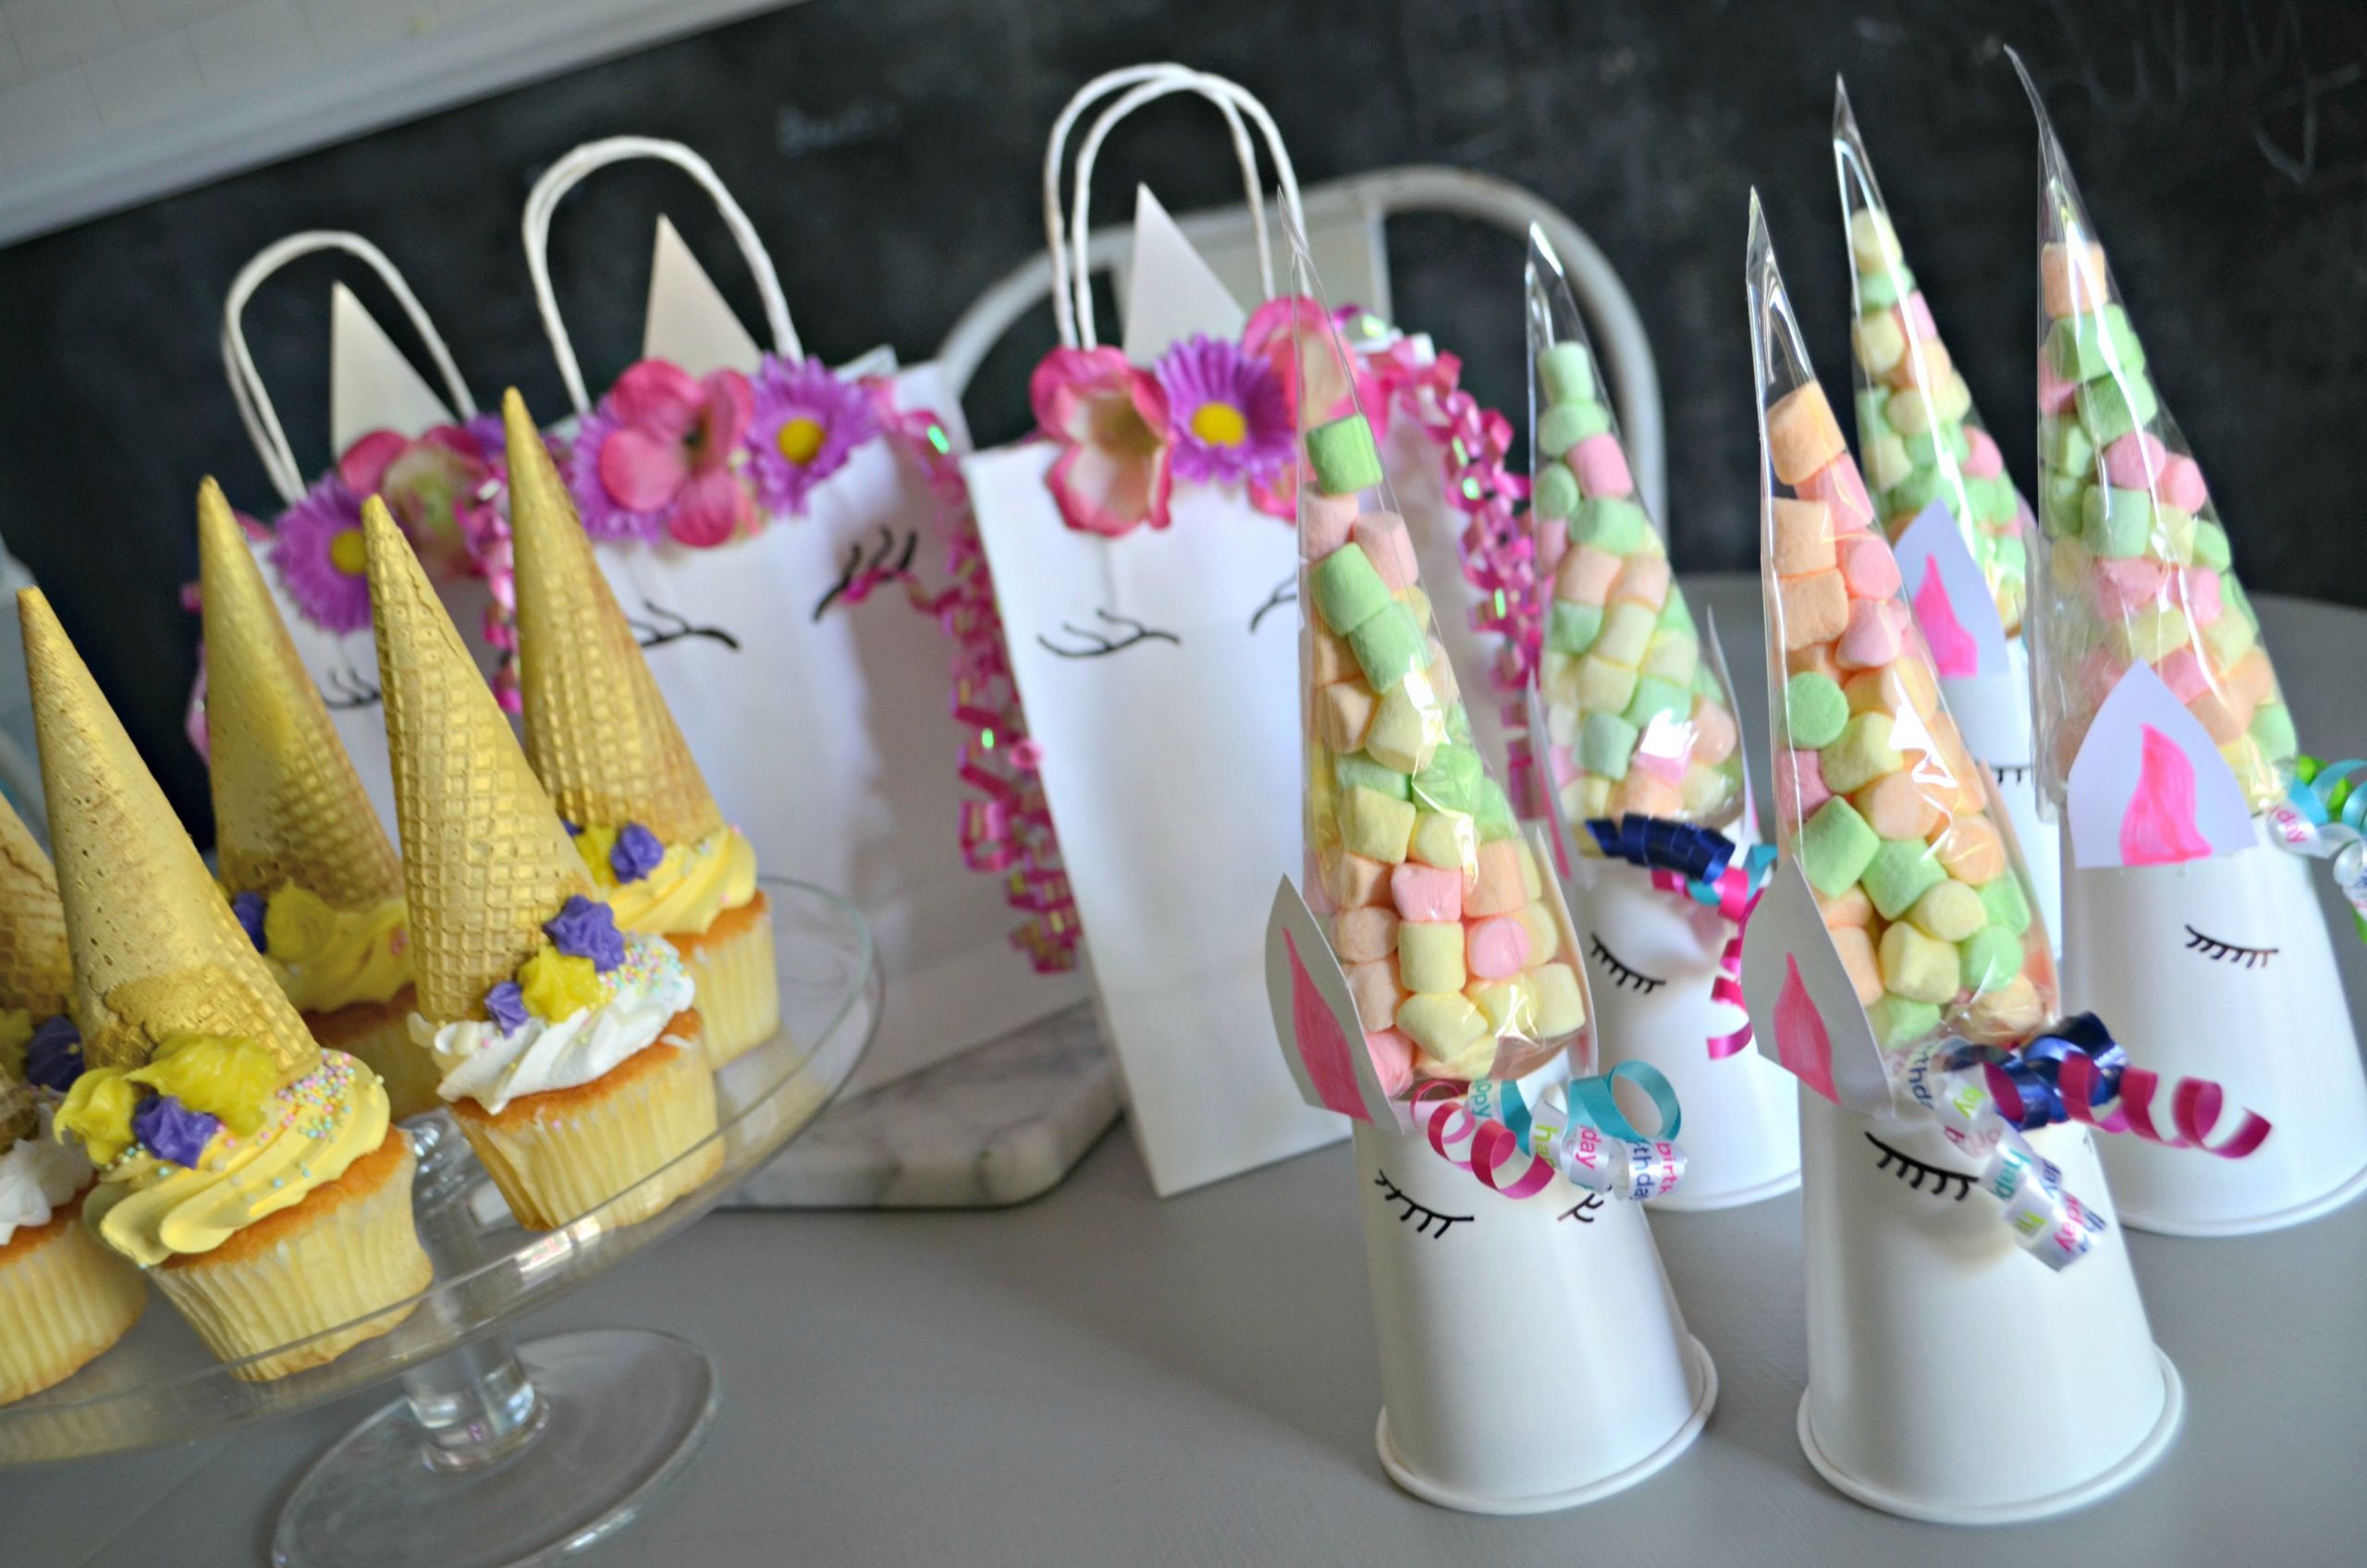 DIY Party Decorations
 Make These 3 Frugal Cute and Easy DIY Unicorn Birthday